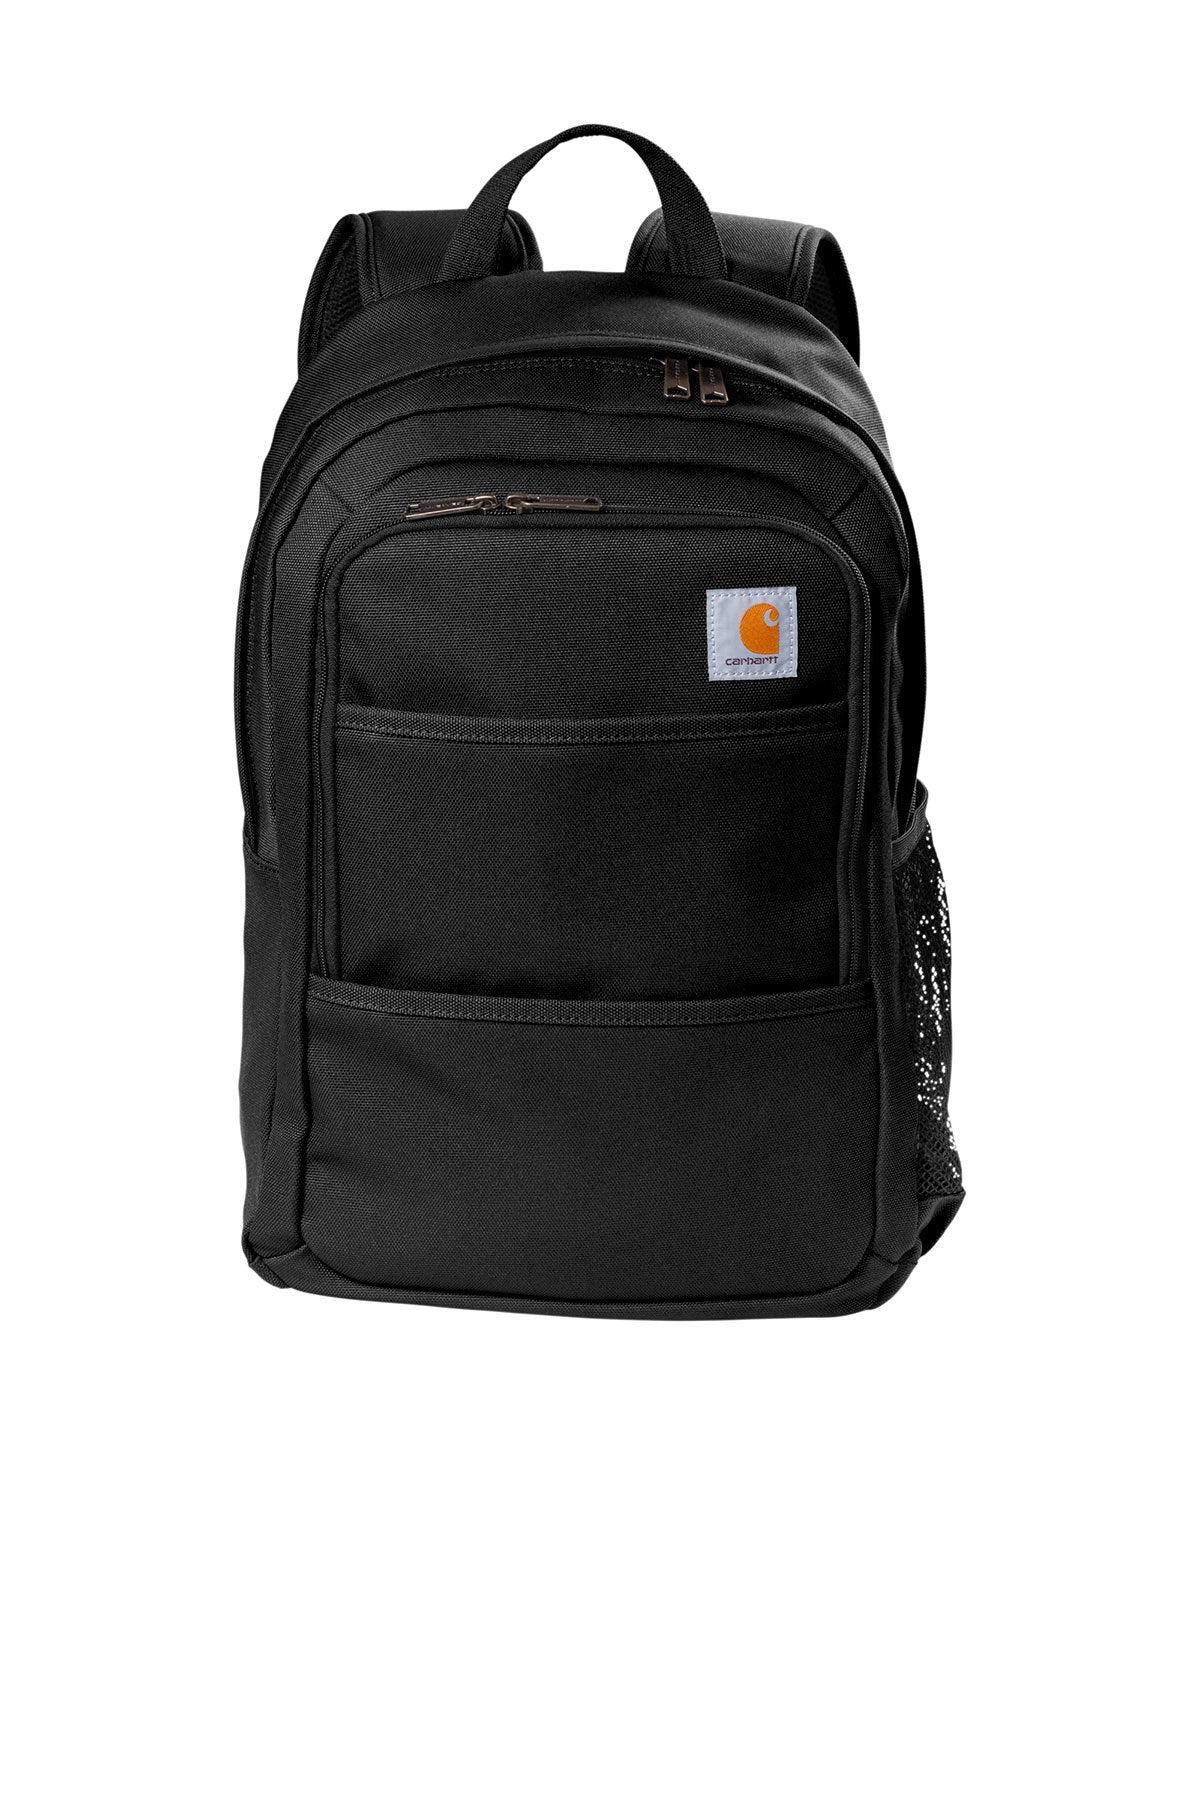 Carhartt® - Foundry Series Backpack - CT89350303